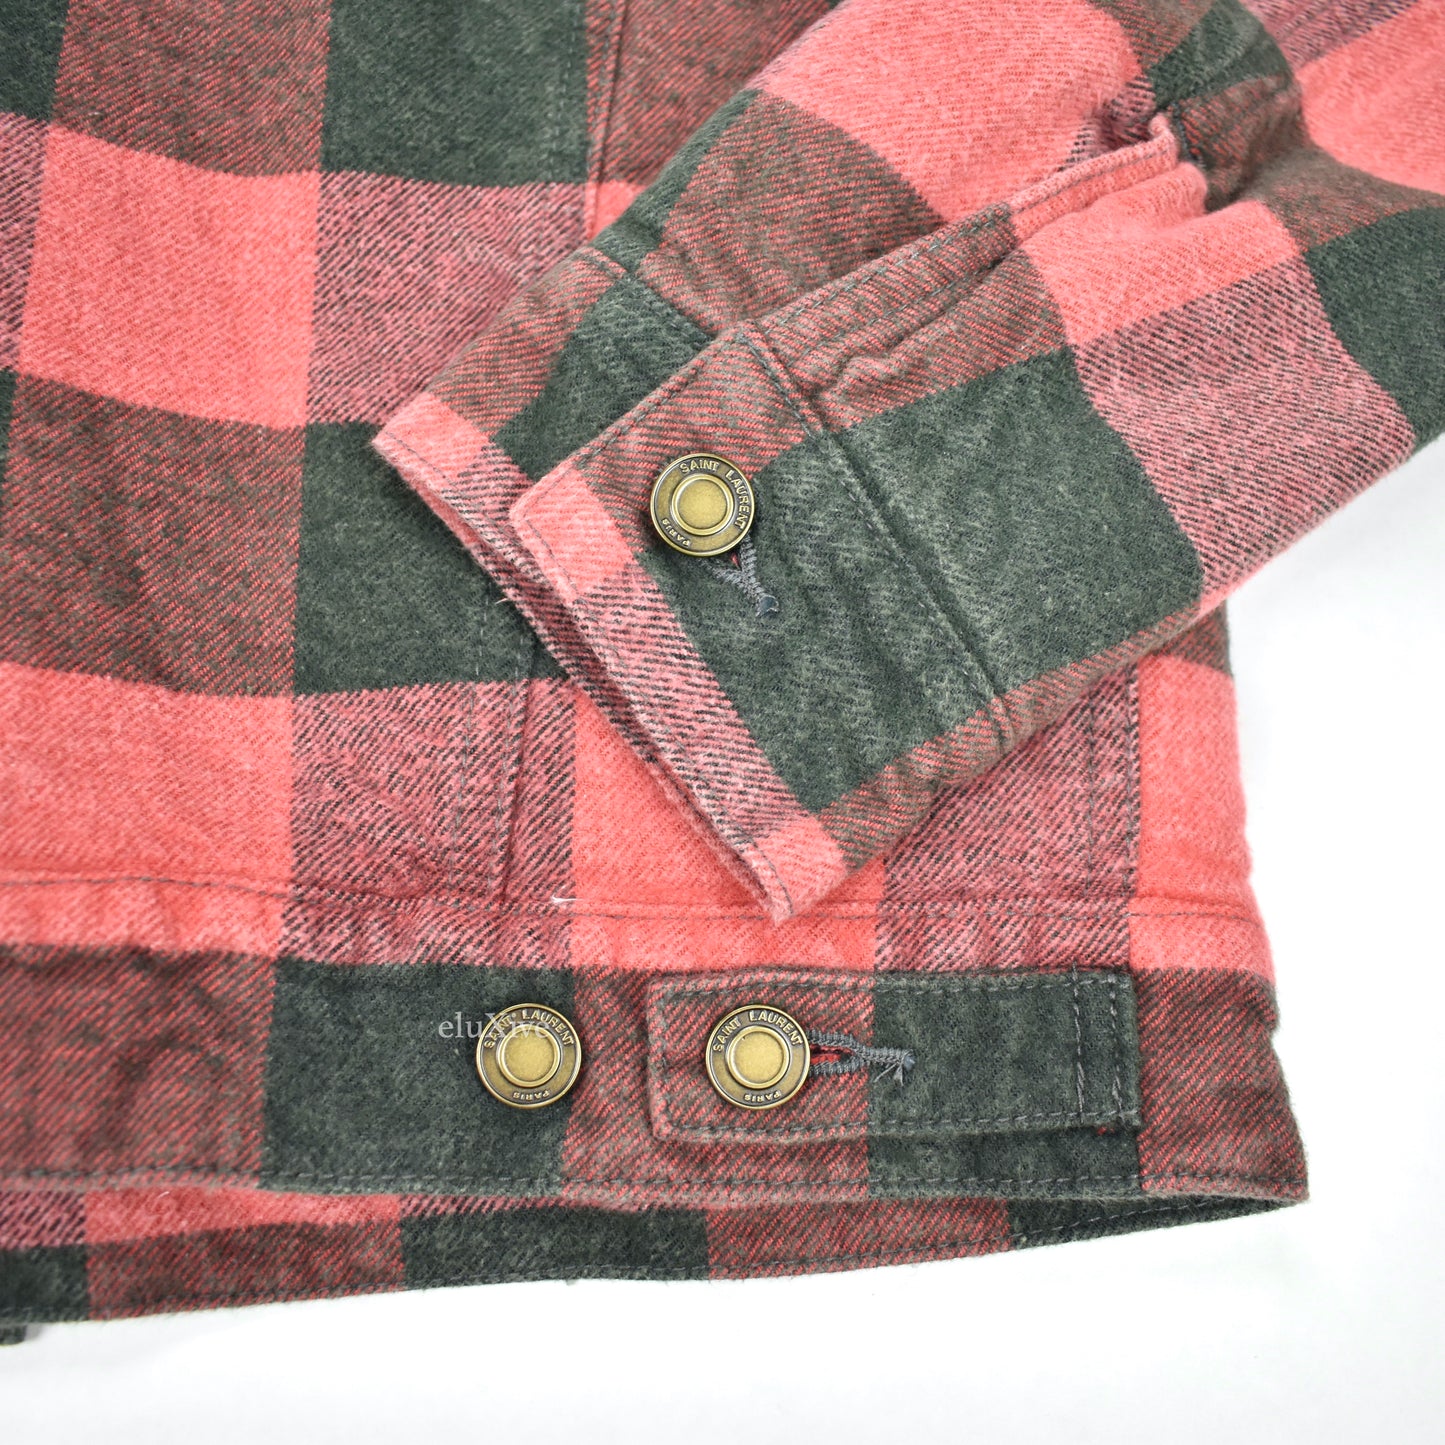 Saint Laurent - Red Plaid Shearling Lined Trucker Jacket